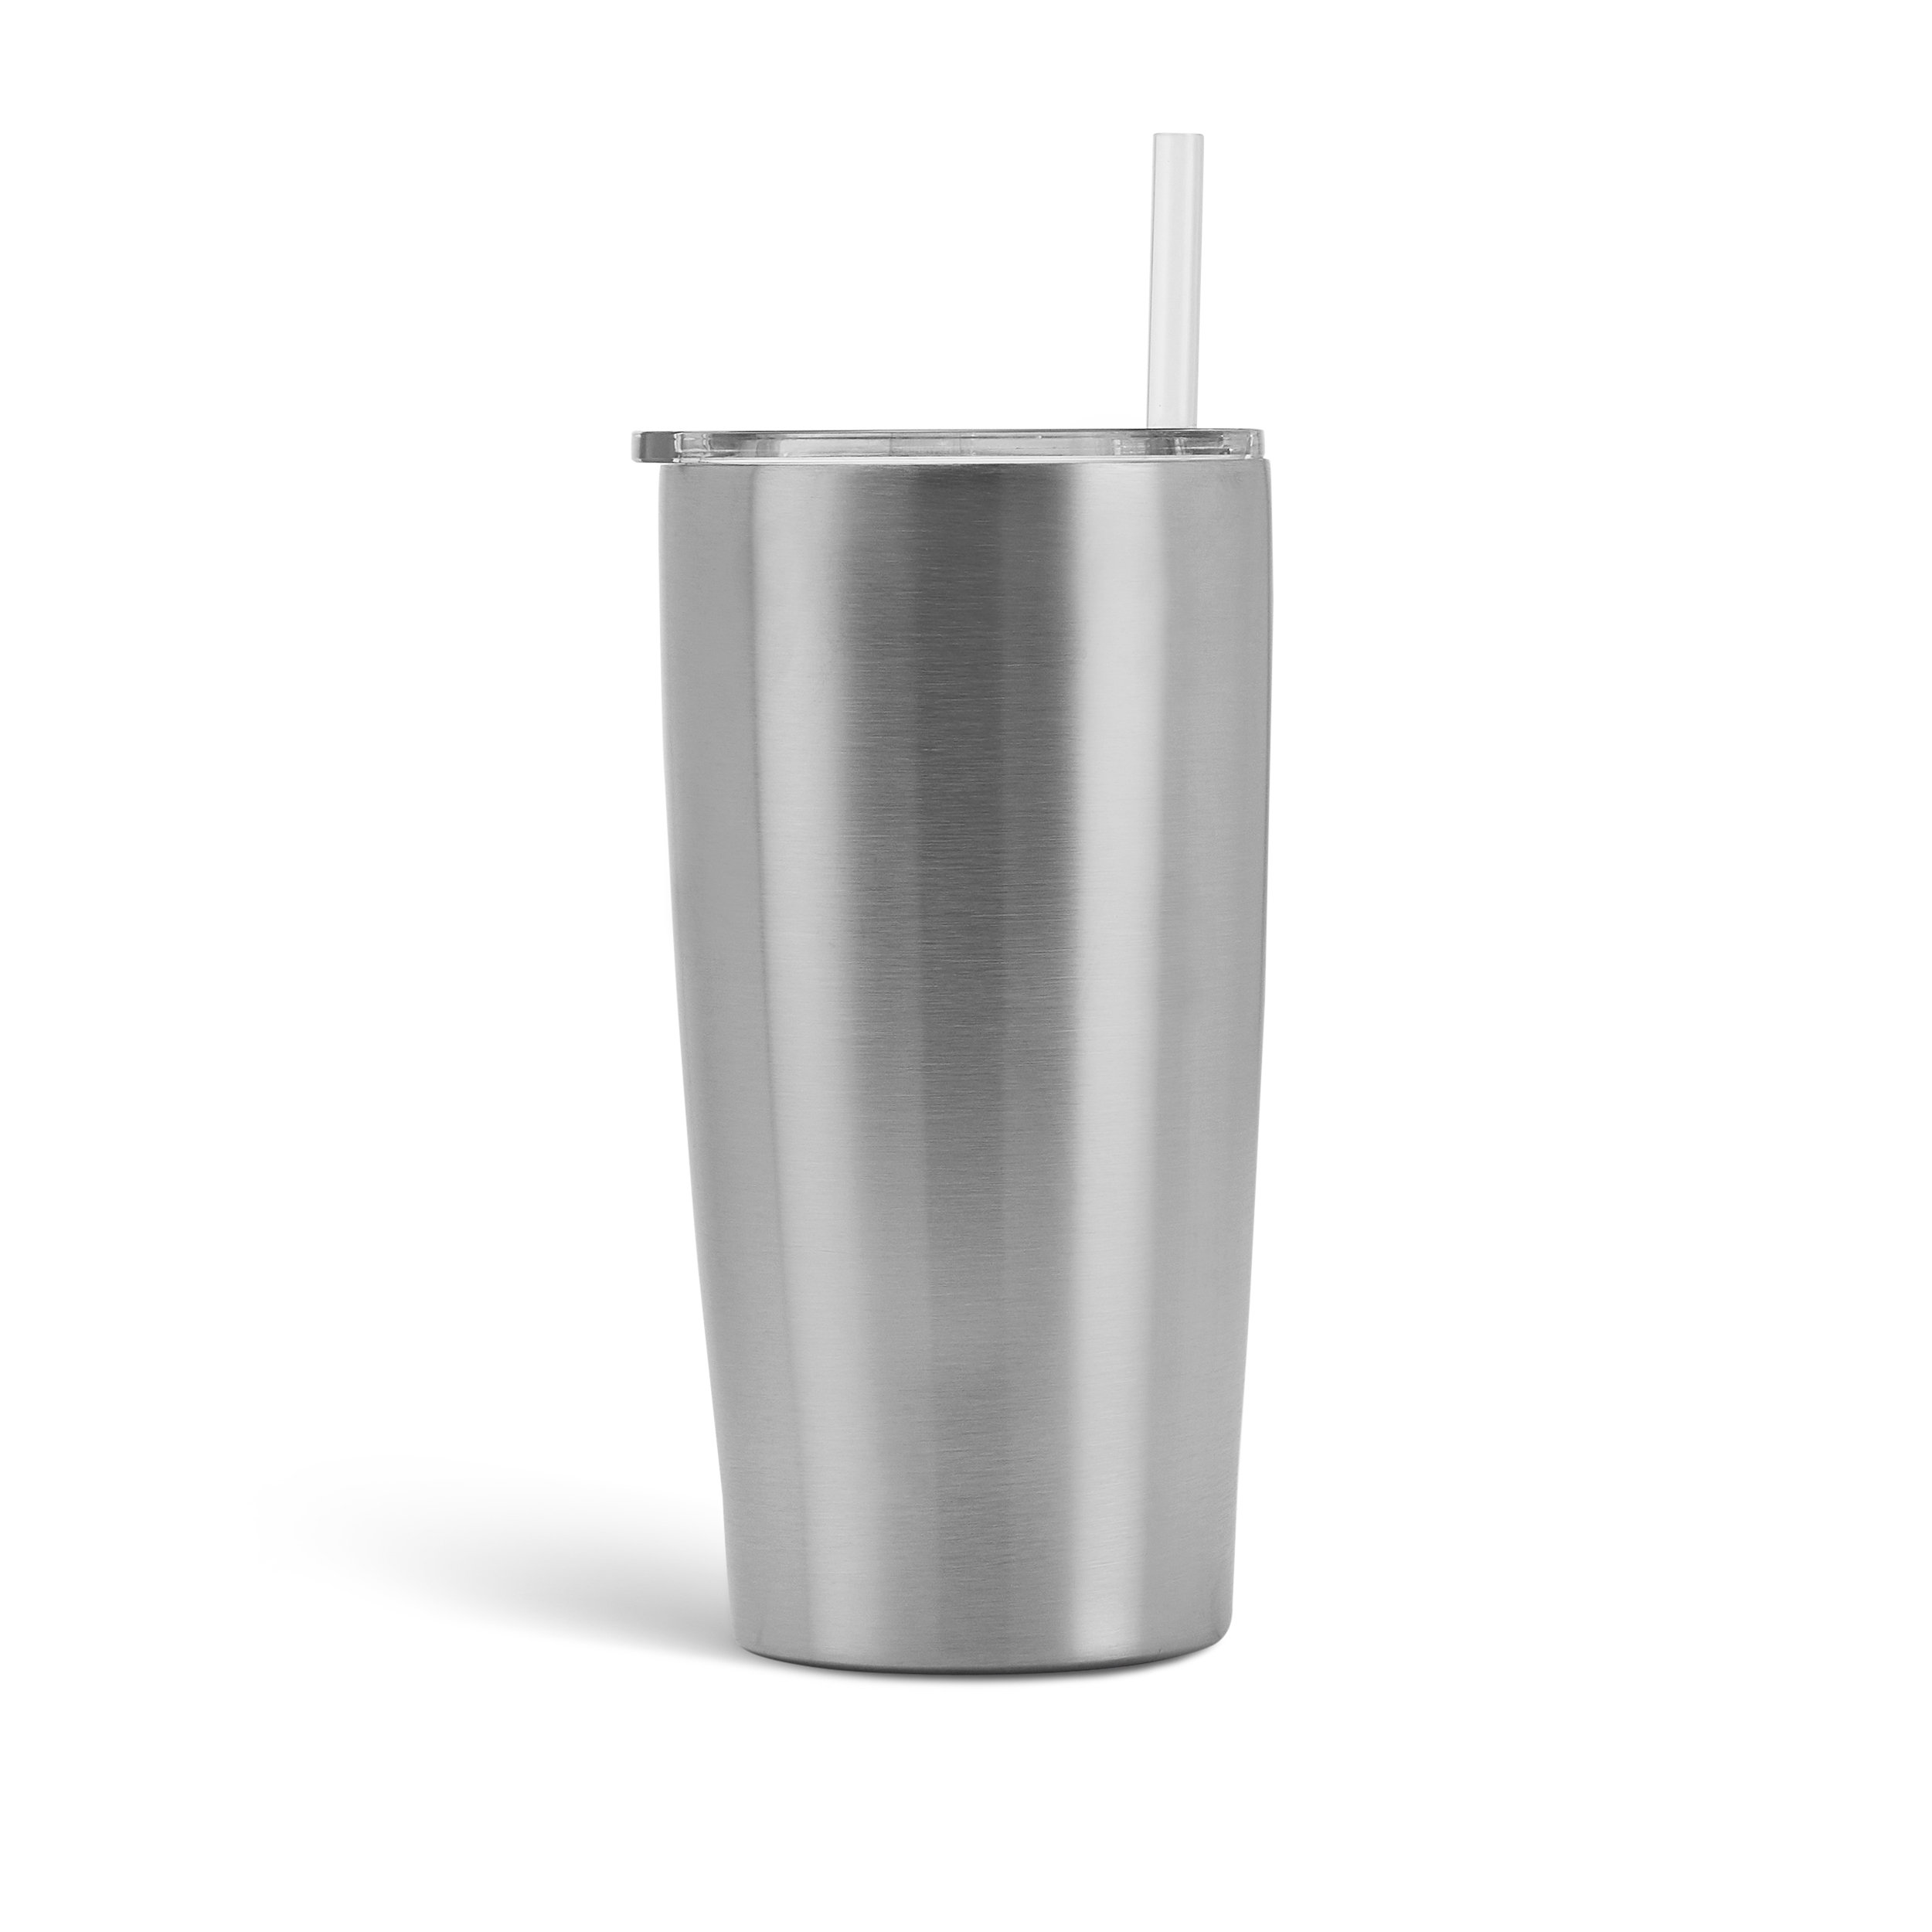 Cupture Stainless Steel Skinny Insulated Tumbler Cup with Lid  and Reusable Straw - 16 oz (Winter White): Tumblers & Water Glasses